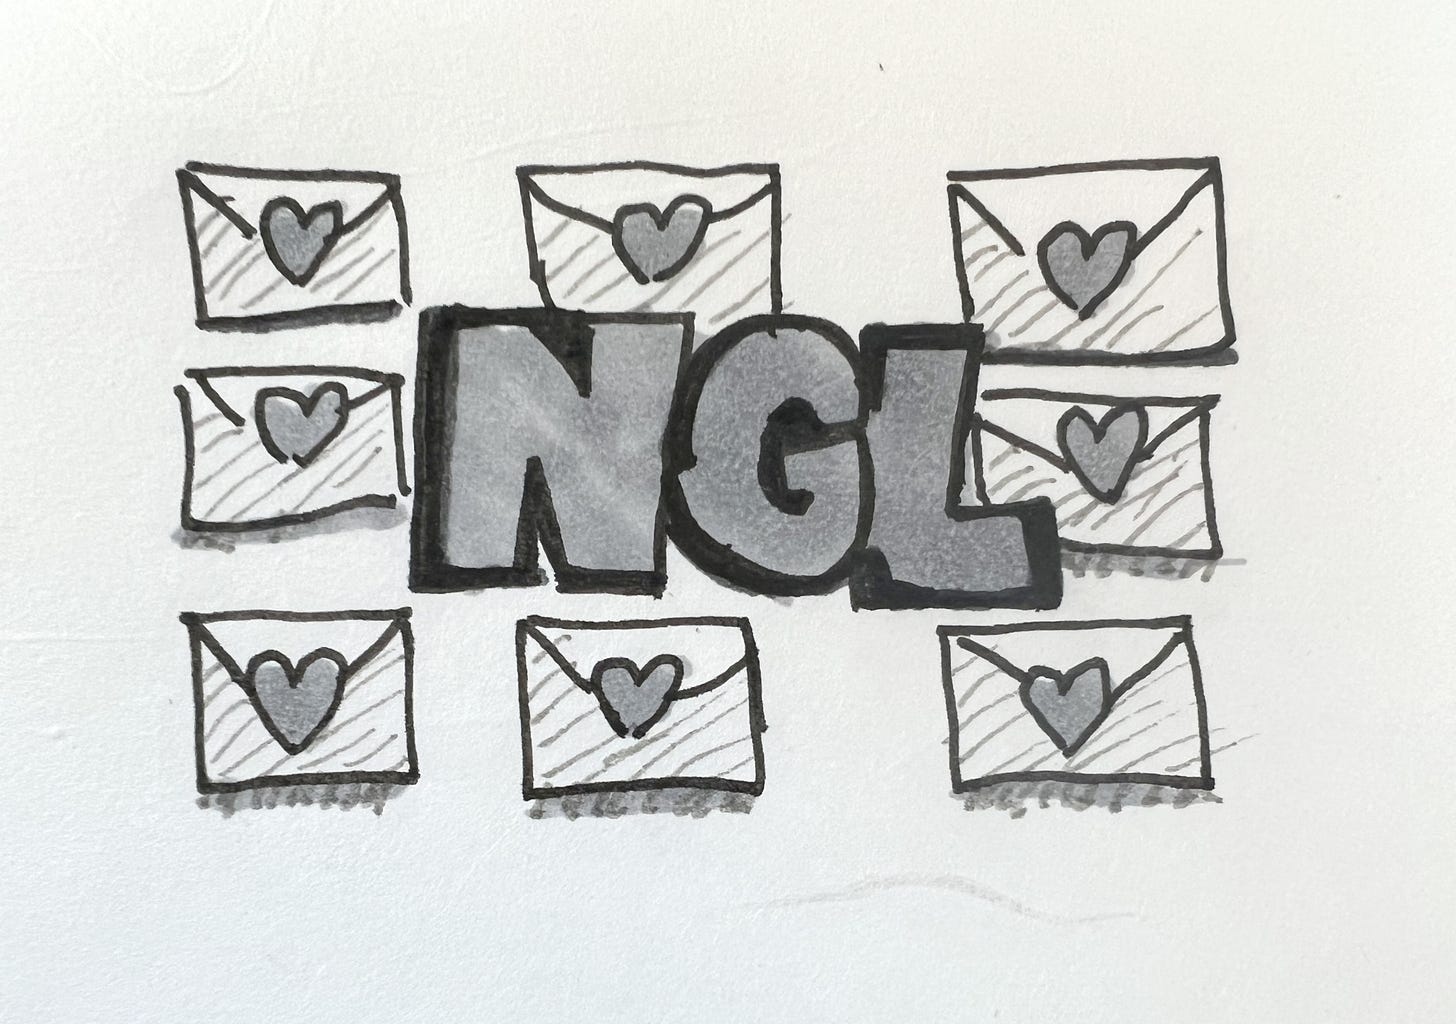 Drawing of heart envelopes in the background with the letters "N-G-L" to indicate "No Gonna Lie"